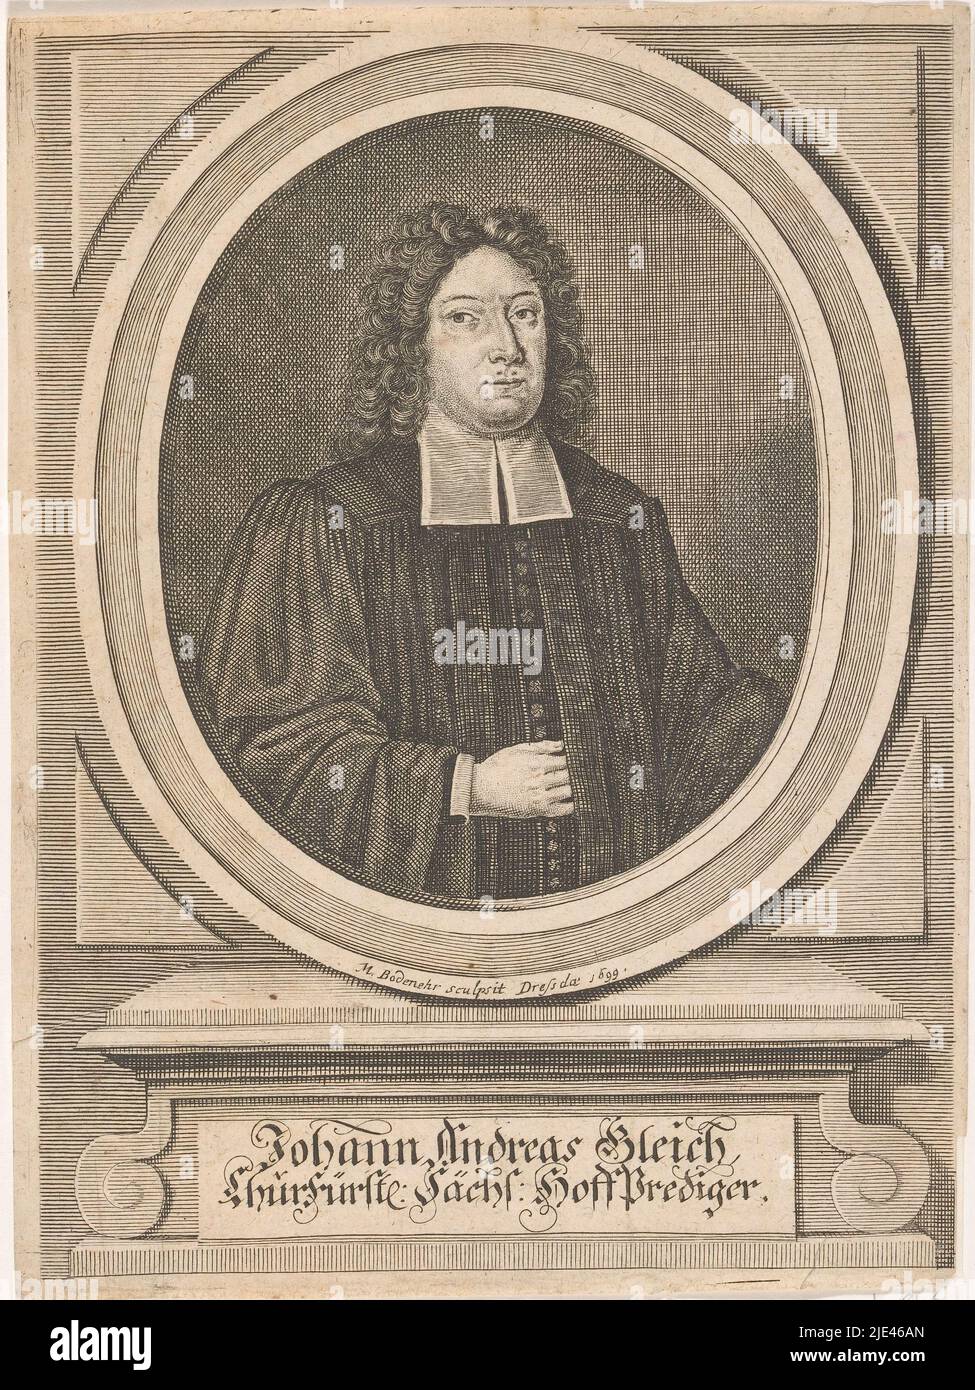 Portrait of Johann Andreas Gleich, Moritz Bodenehr, 1699, print maker: Moritz Bodenehr, (mentioned on object), Dresden, 1699, paper, engraving, h 207 mm - w 154 mm Stock Photo